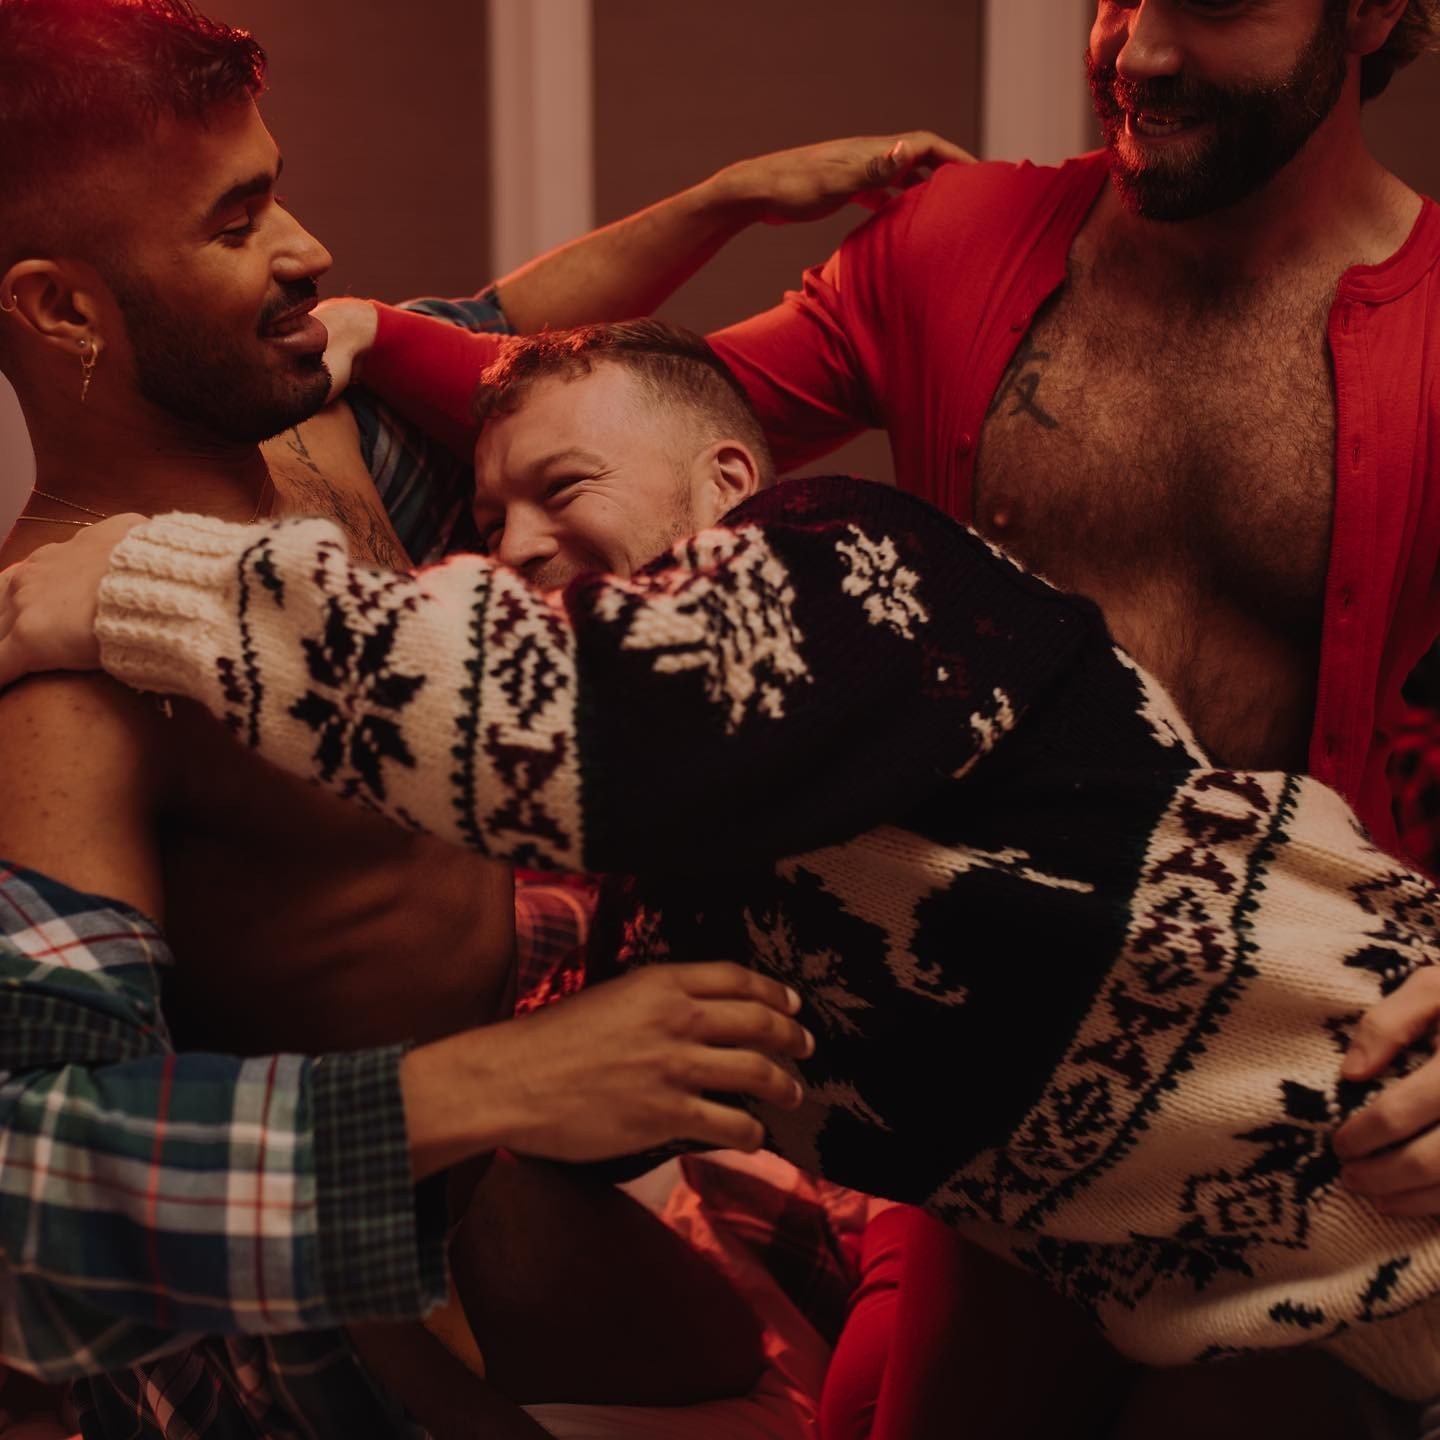 Watch the Photo by DirtyDaddyFunStuff with the username @DirtyDaddyPorn, who is a verified user, posted on January 8, 2024 and the text says '#christmas #hairy #santa #stubble #beards #bears #cowboys and more'